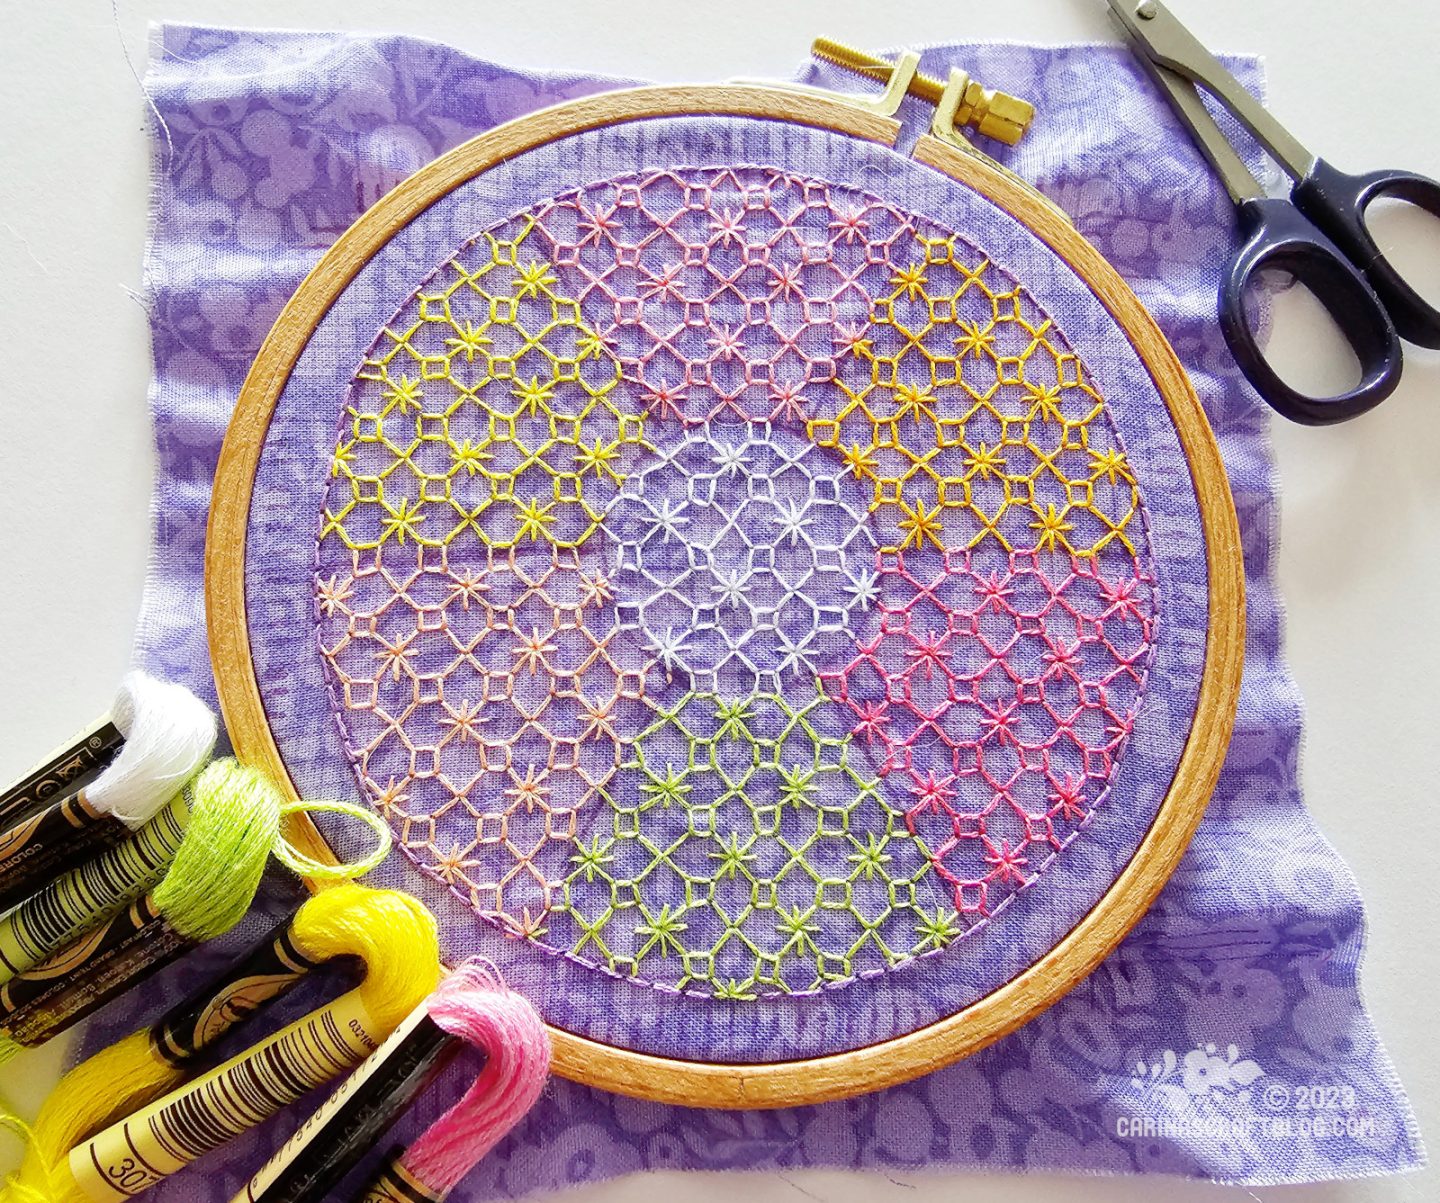 Over head view of wooden embroidery hoop with purple fabric. On the fabric is an embroidered circle that almost fills the hoop. The circle is divided into seven sections, stitched with the same geometric pattern but in seven different colours.